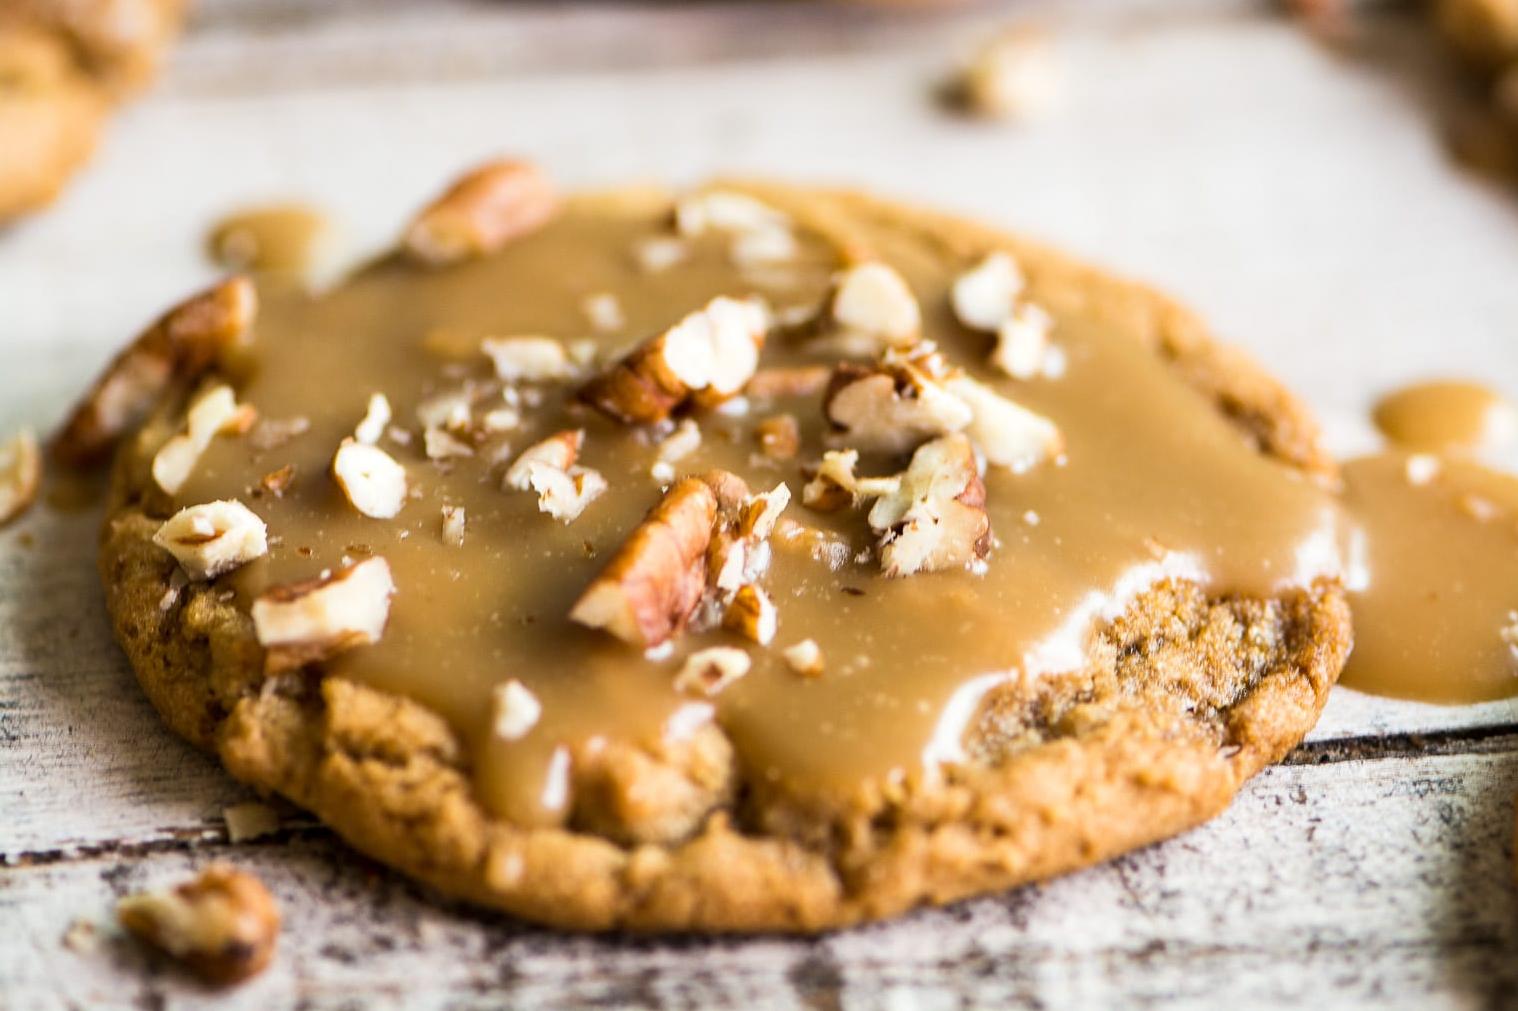  Get a taste of the South with these irresistible Praline Cookies.